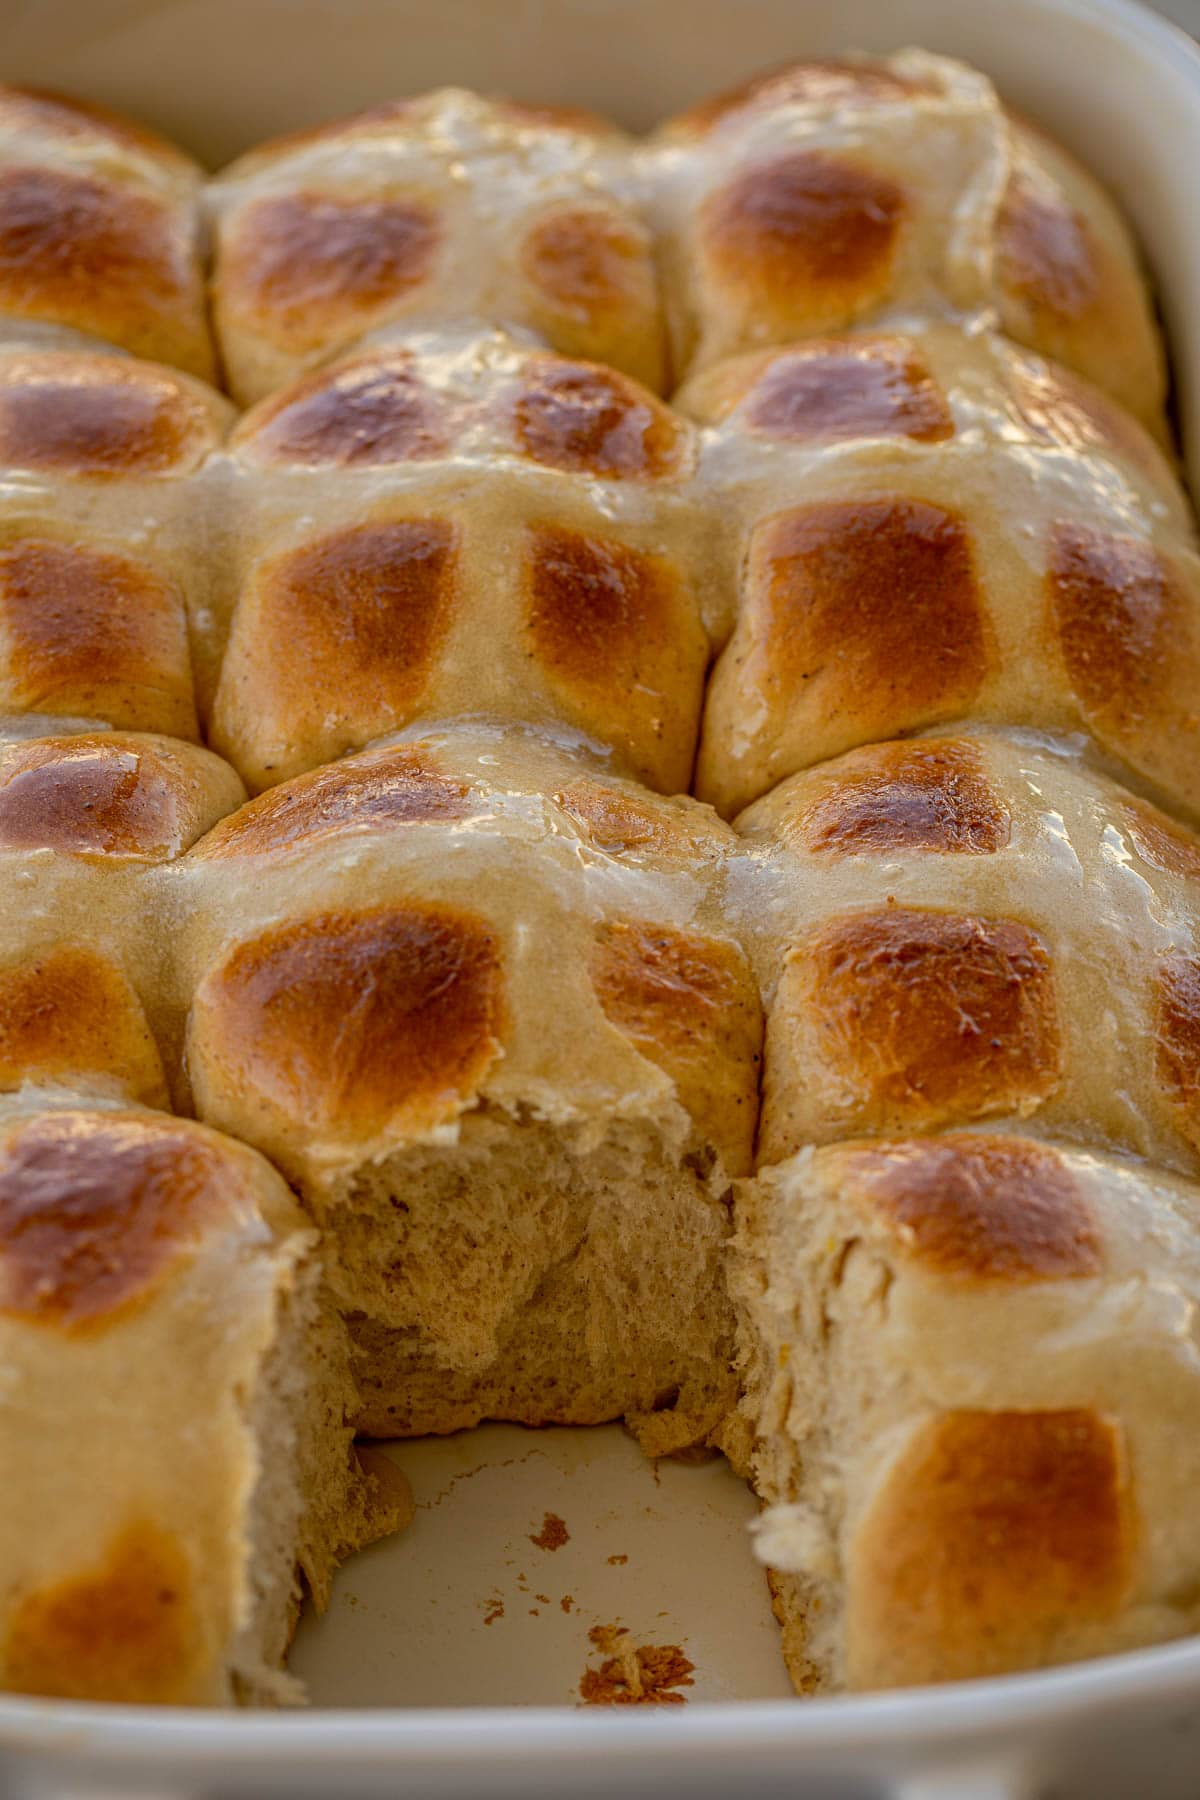 Hot Cross Buns in a baking dish with one removed